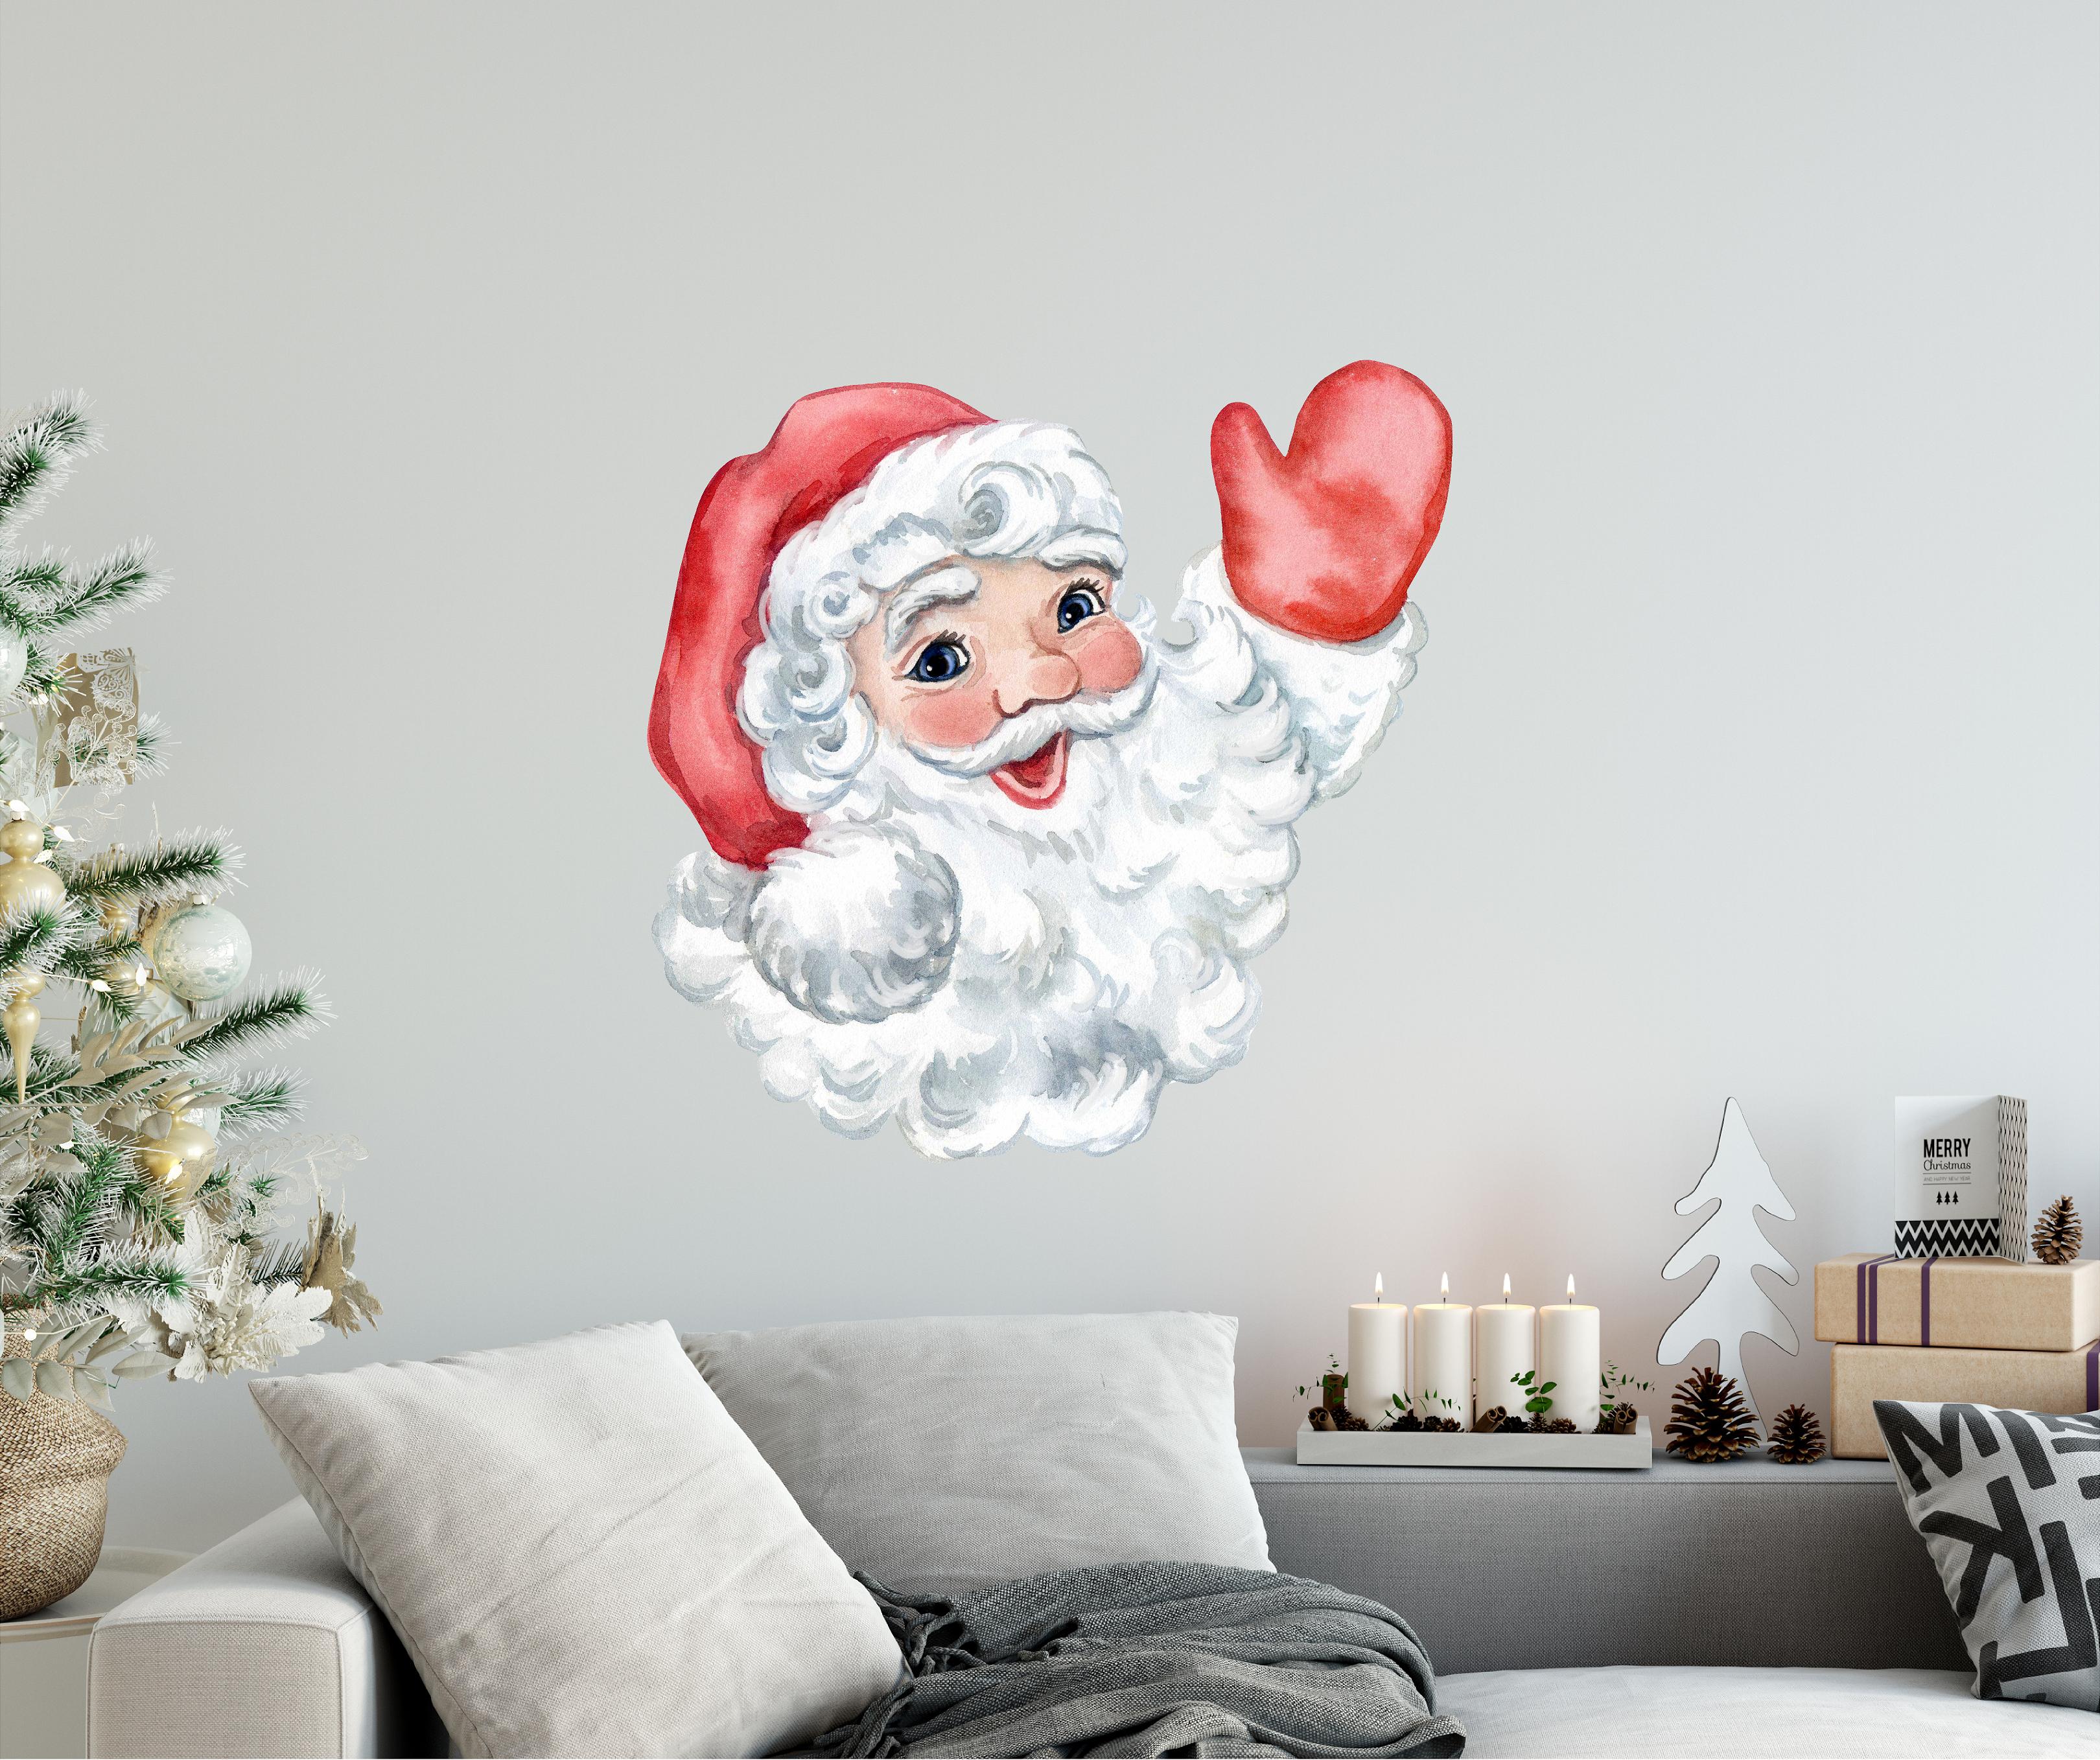 Greetings from Santa Claus Wall Decal Retro Christmas Fabric Wall Sticker | DecalBaby